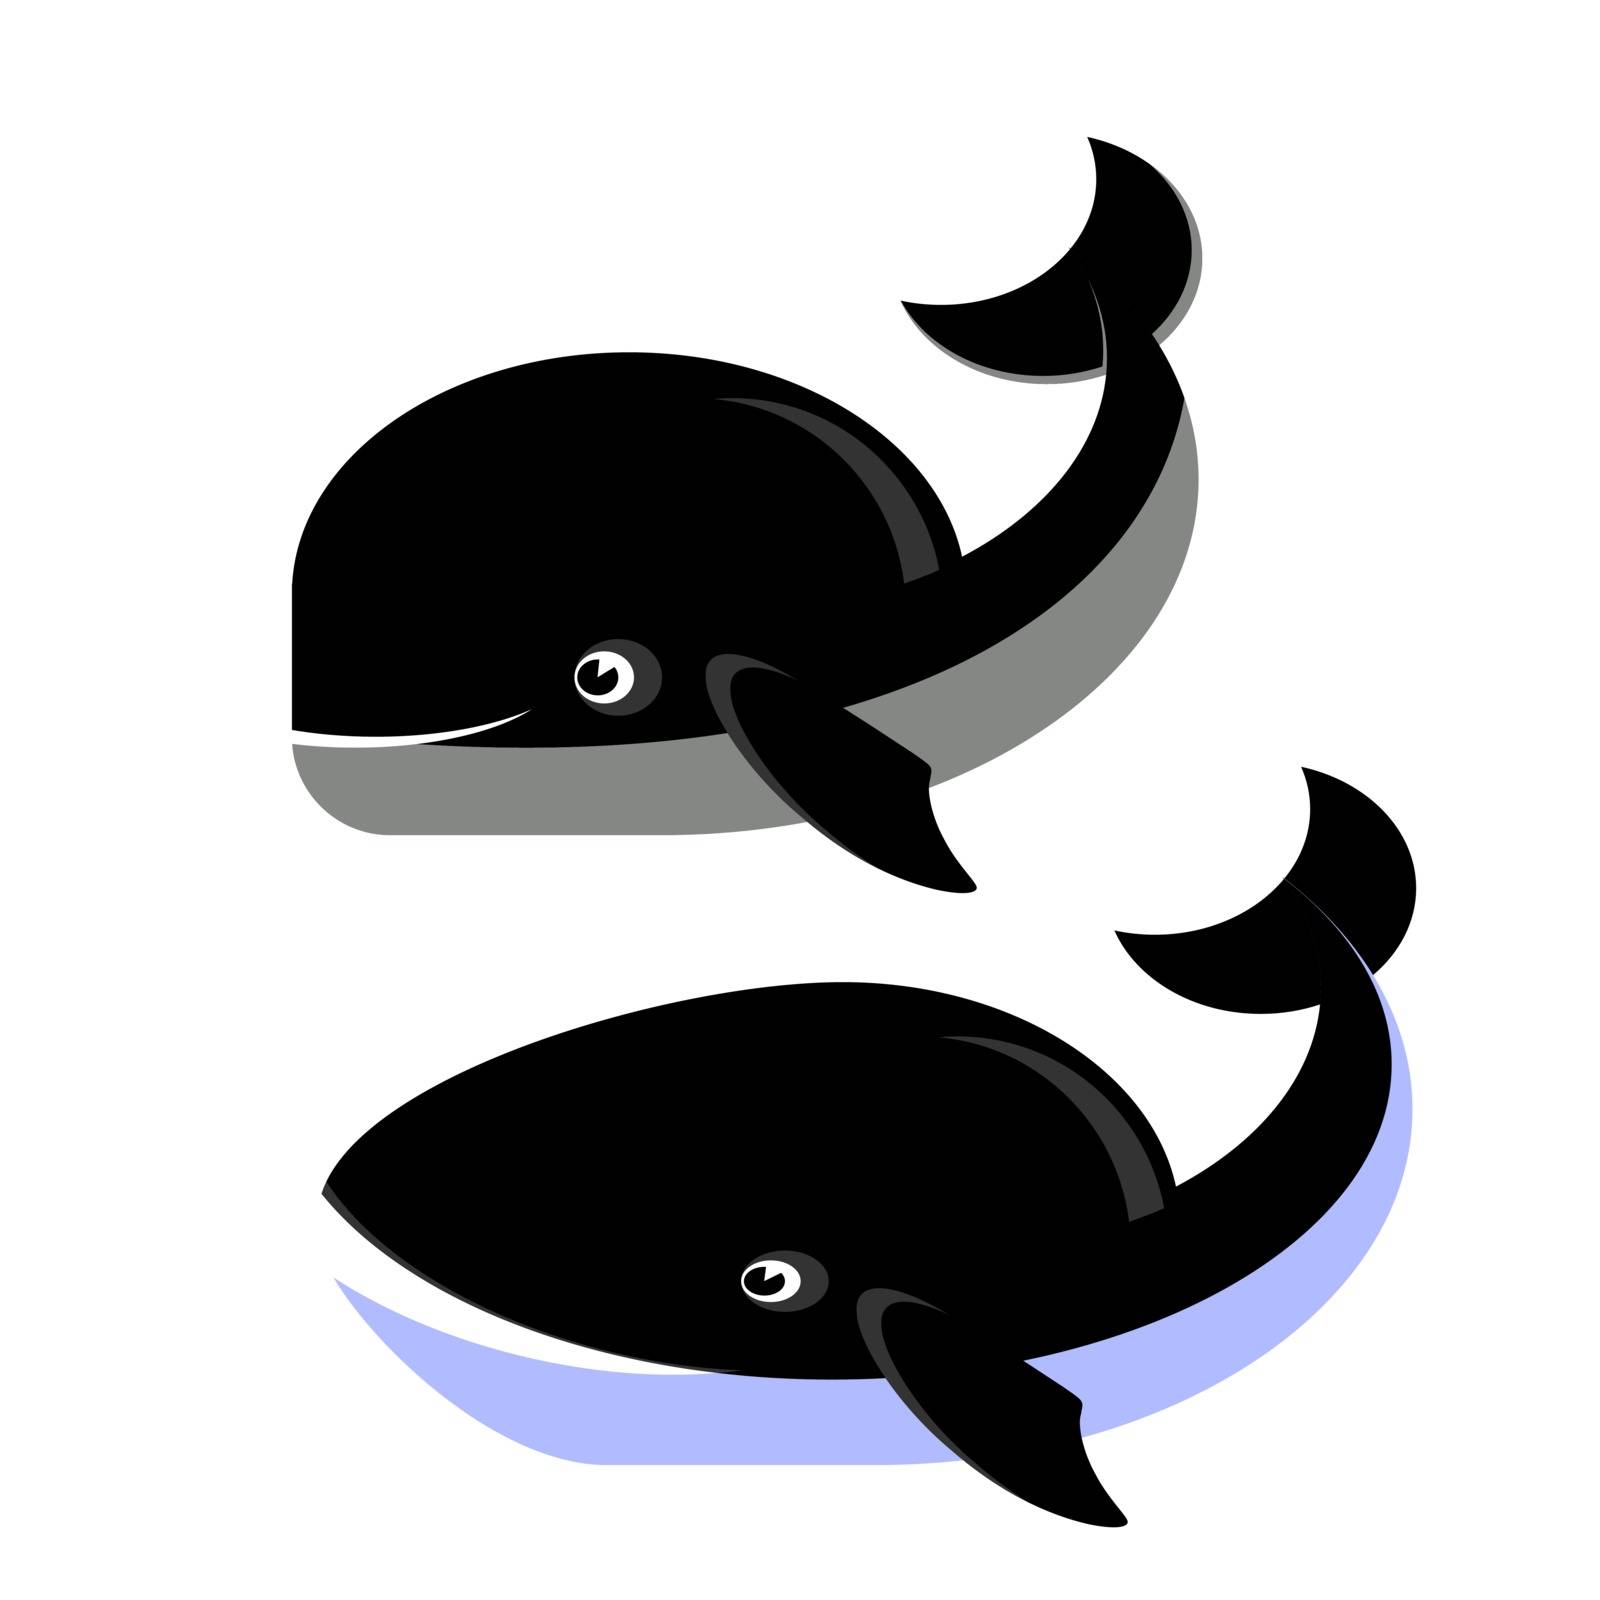 Two Whale Icons Isolated on White Background